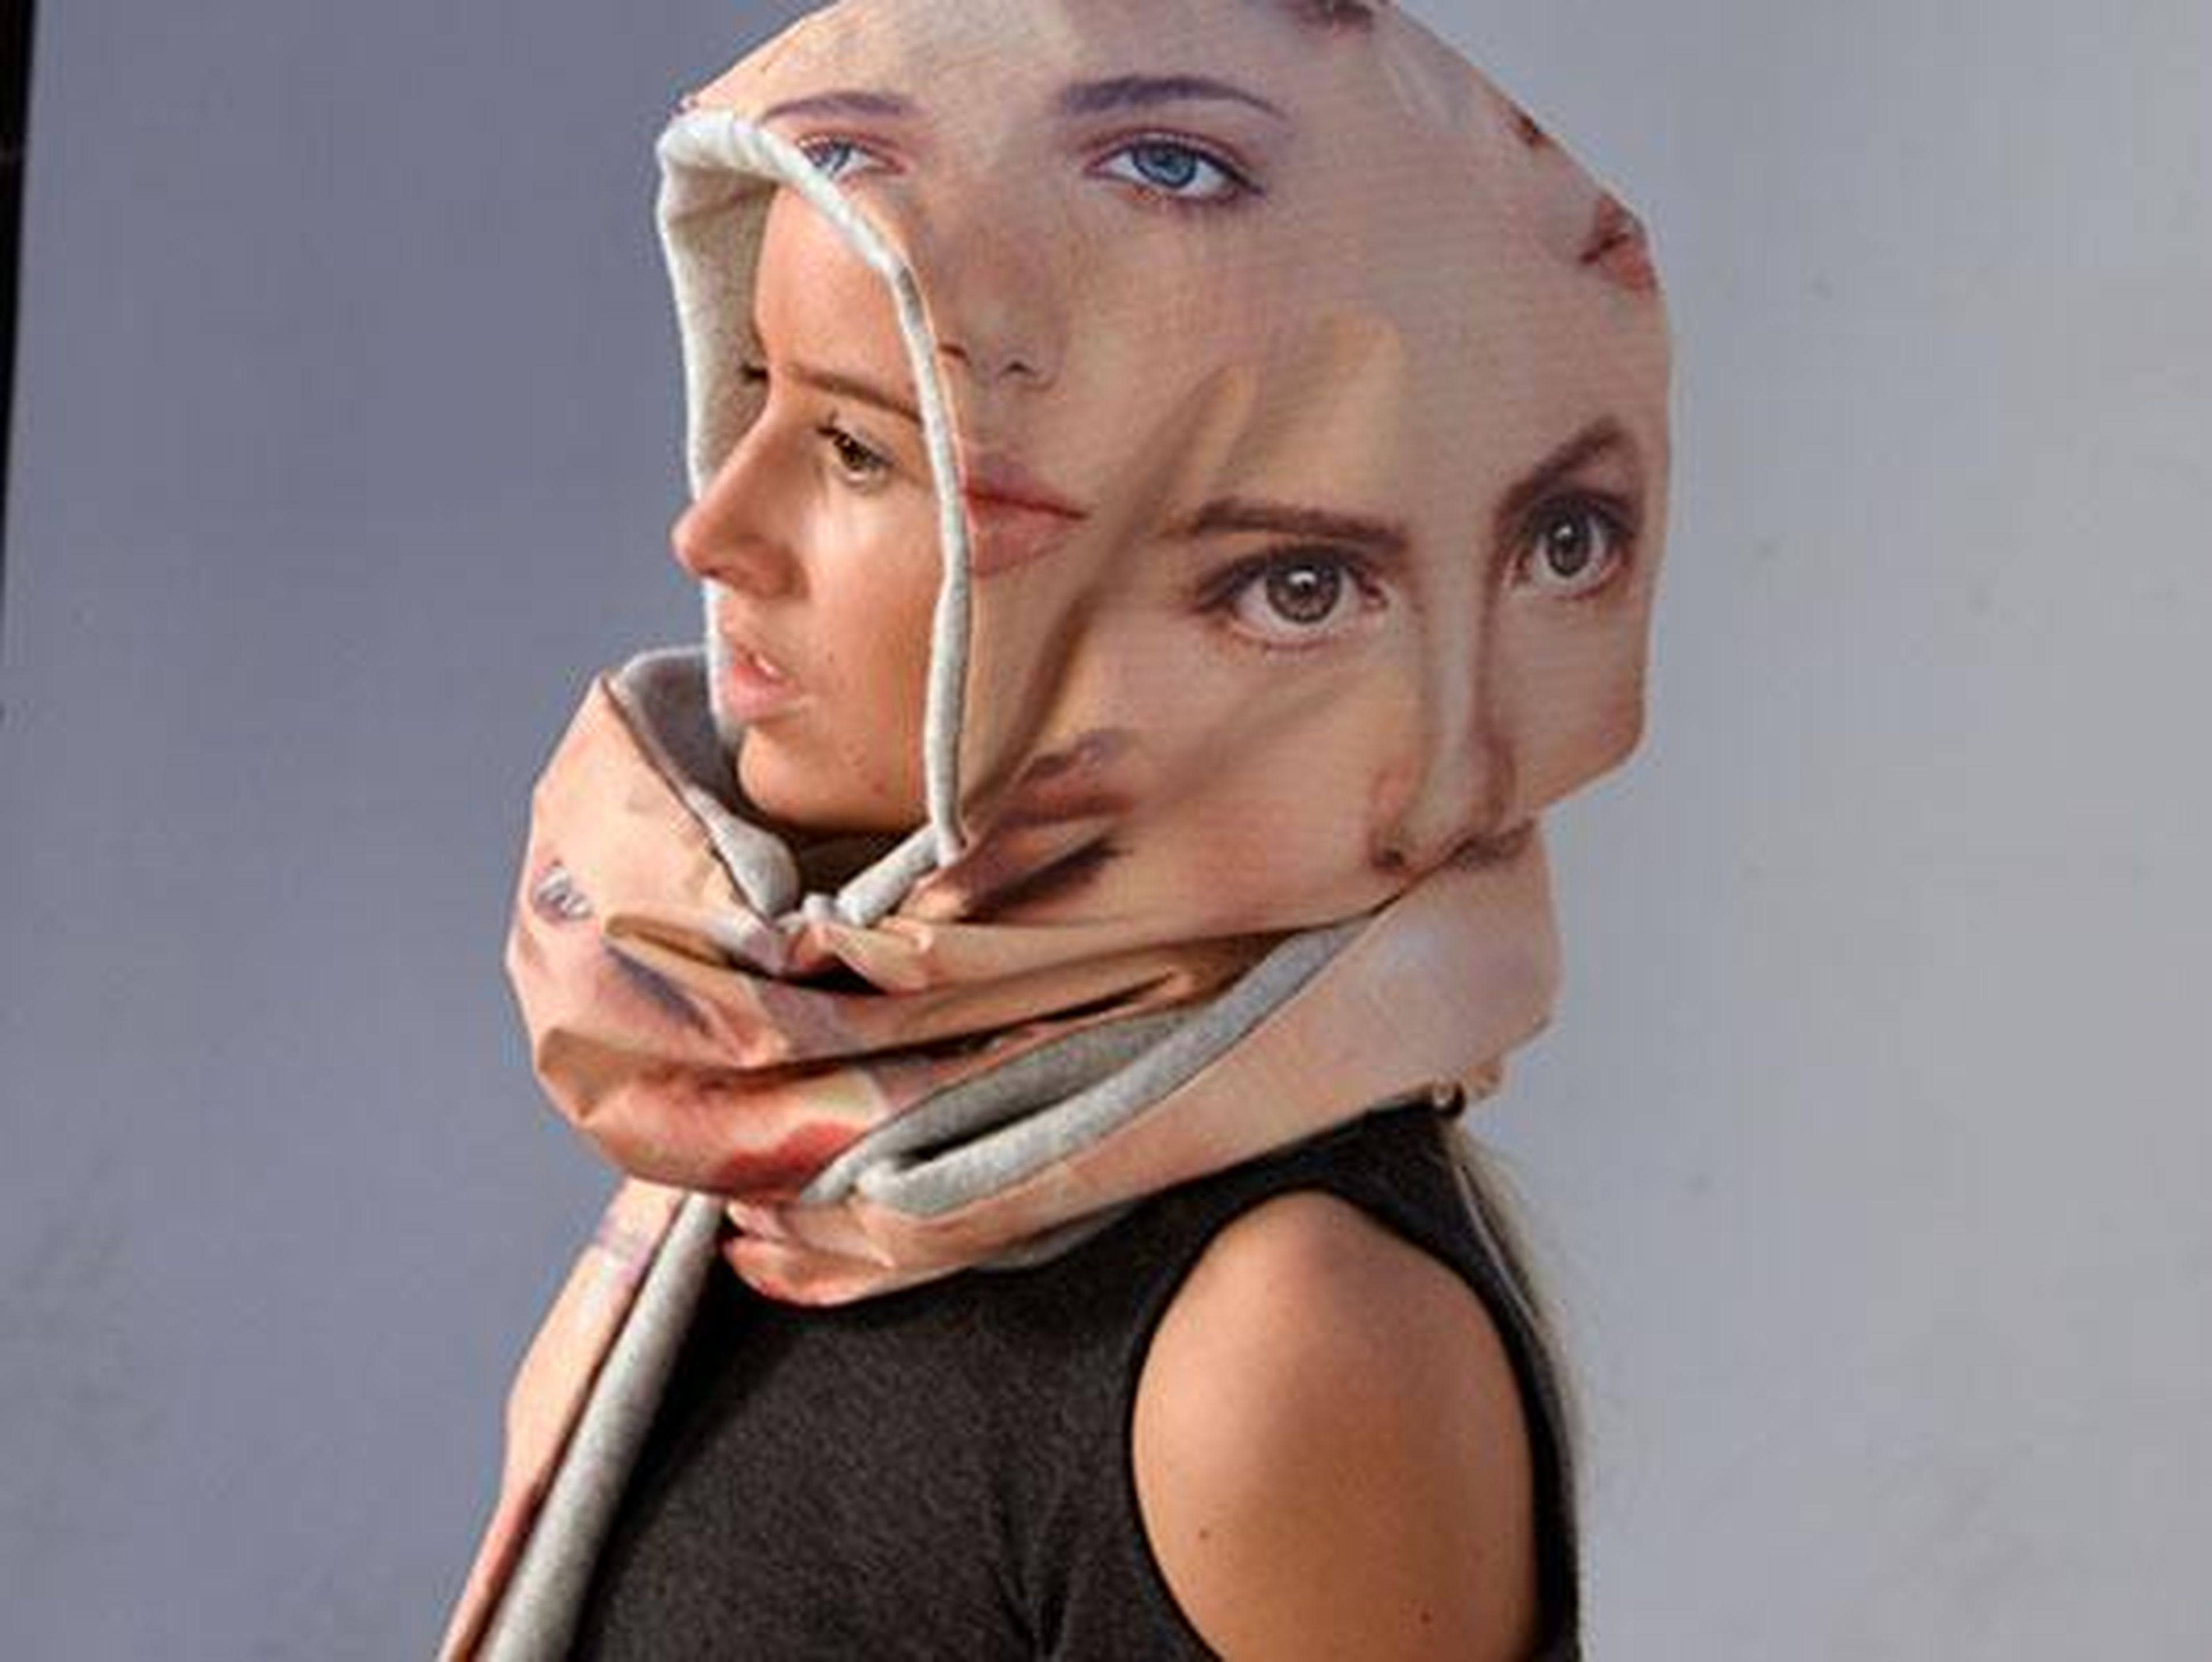 Sanne Weekers, a design student in the Netherlands, created a headscarf decorated with faces intended to confuse algorithms.